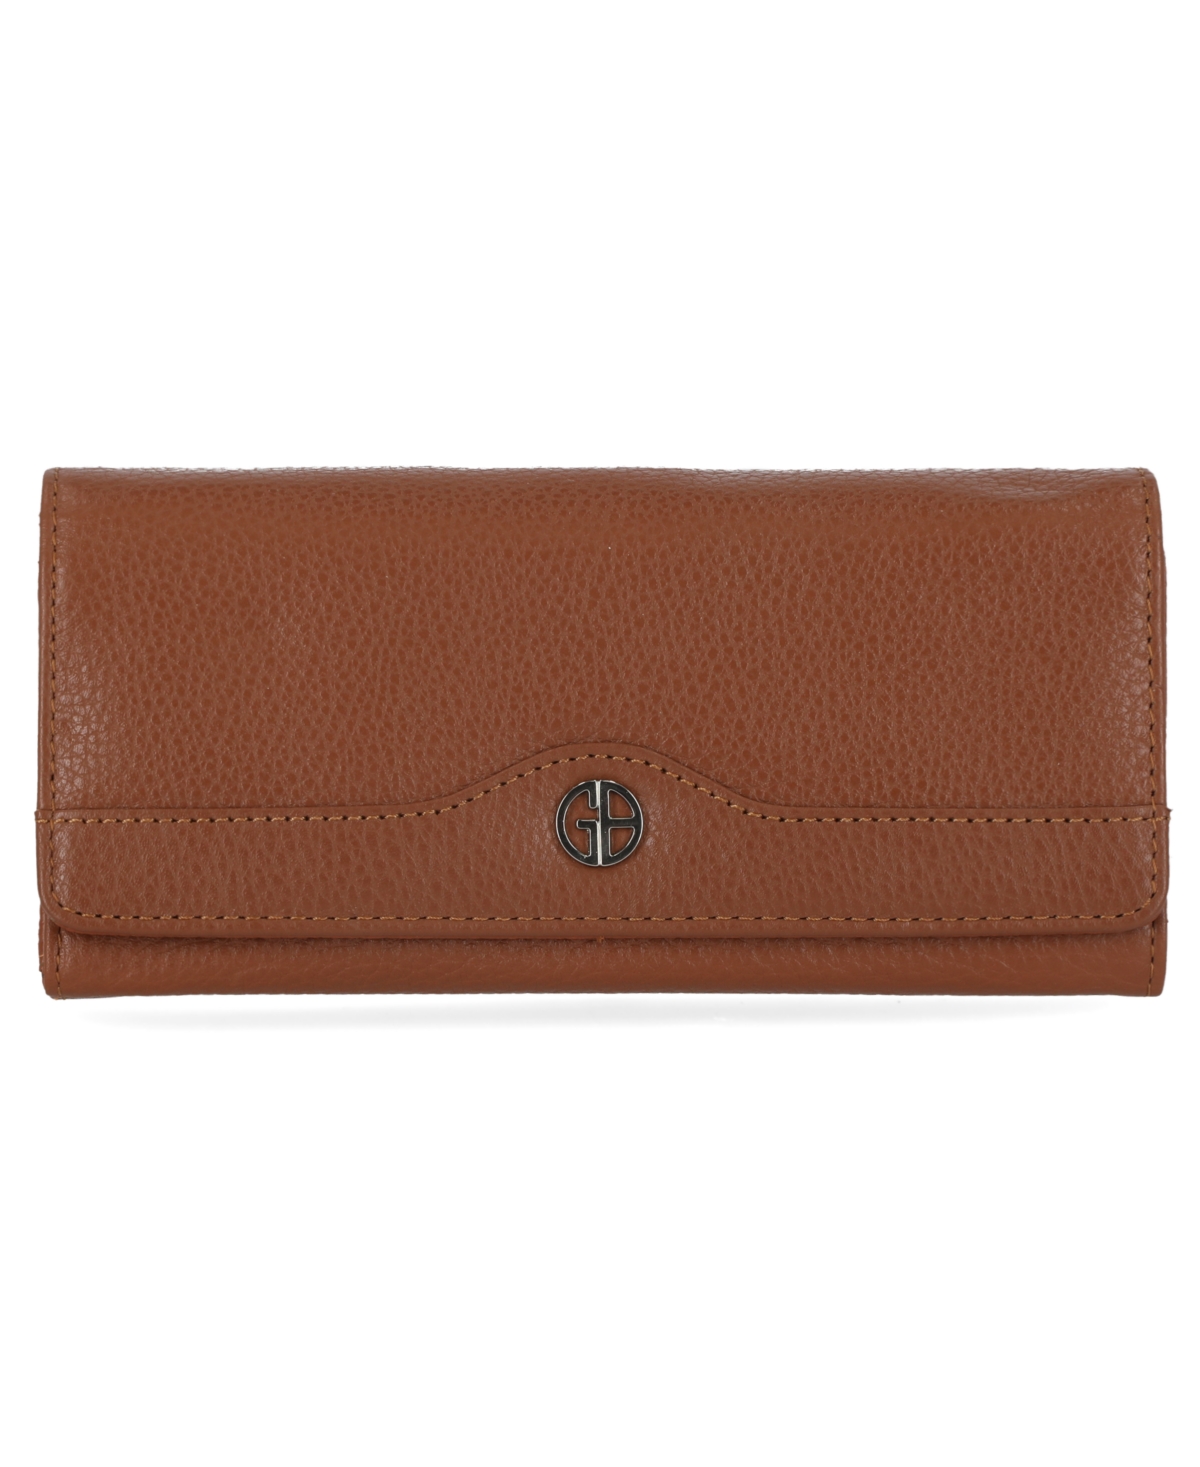 Giani Bernini Pebble Leather Receipt Wallet, Created For Macy's In Cognac,silver